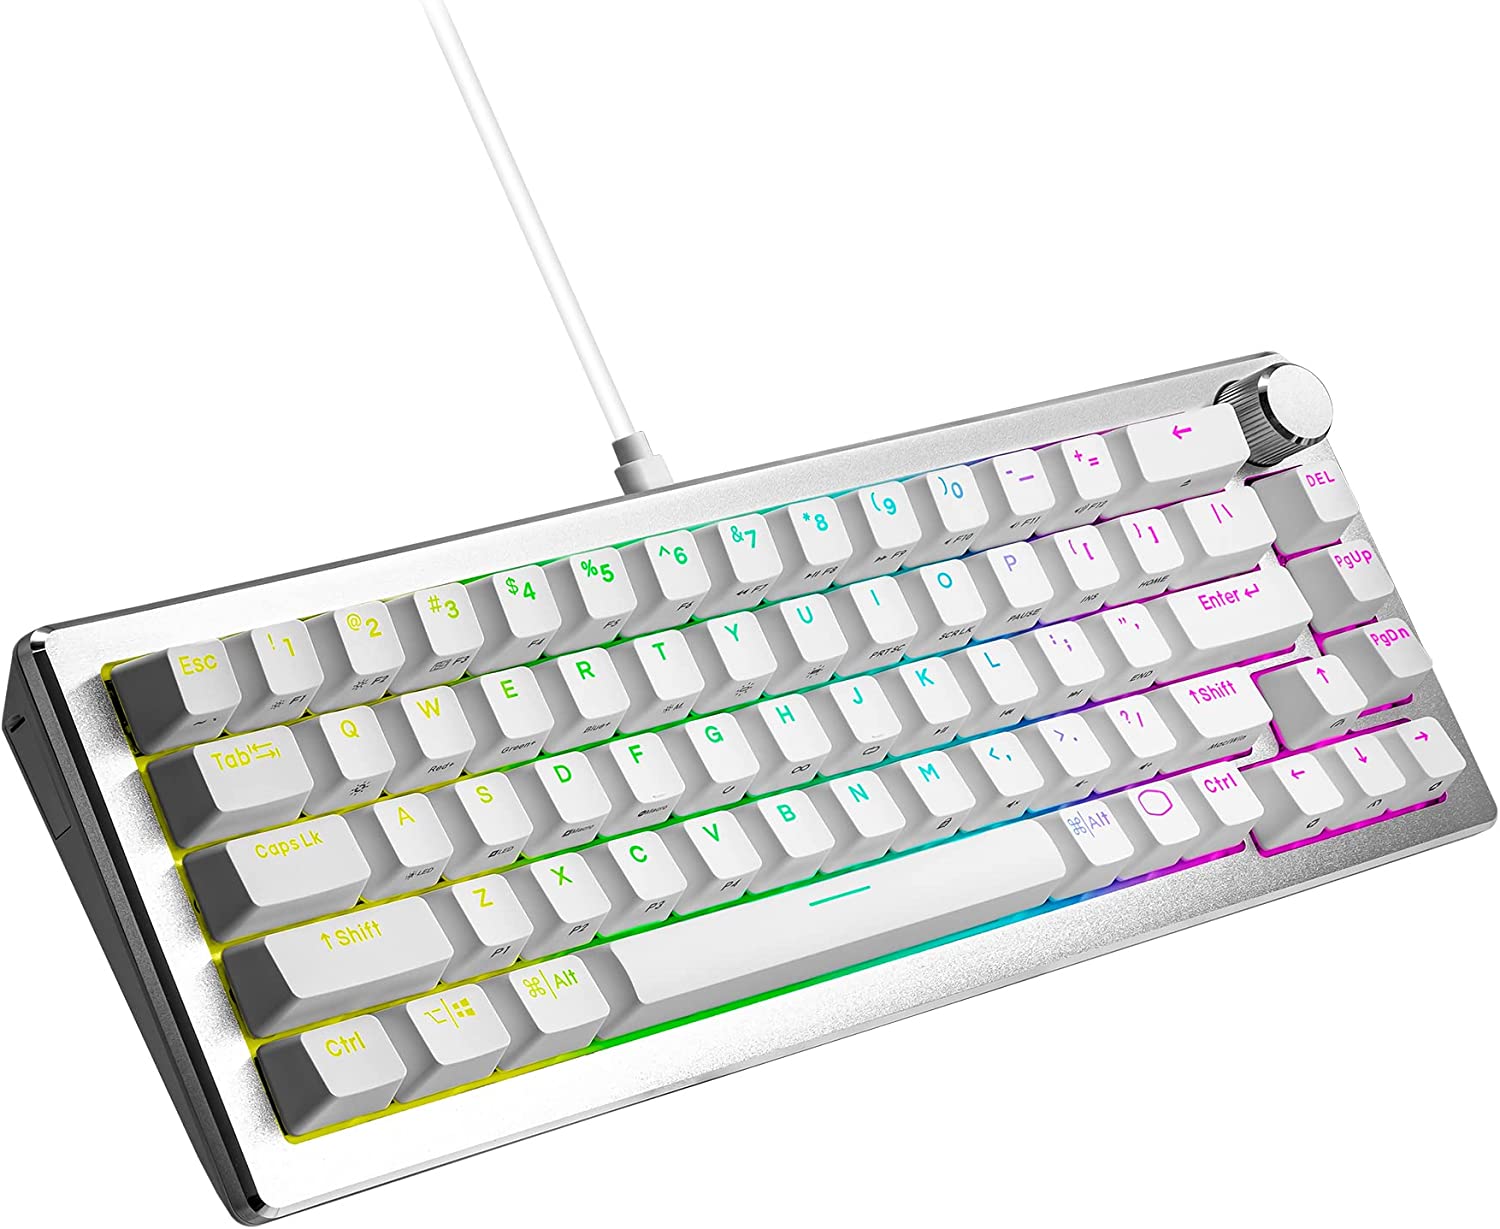 This wired mechanical keyboard can be easily modified in multiple ways.